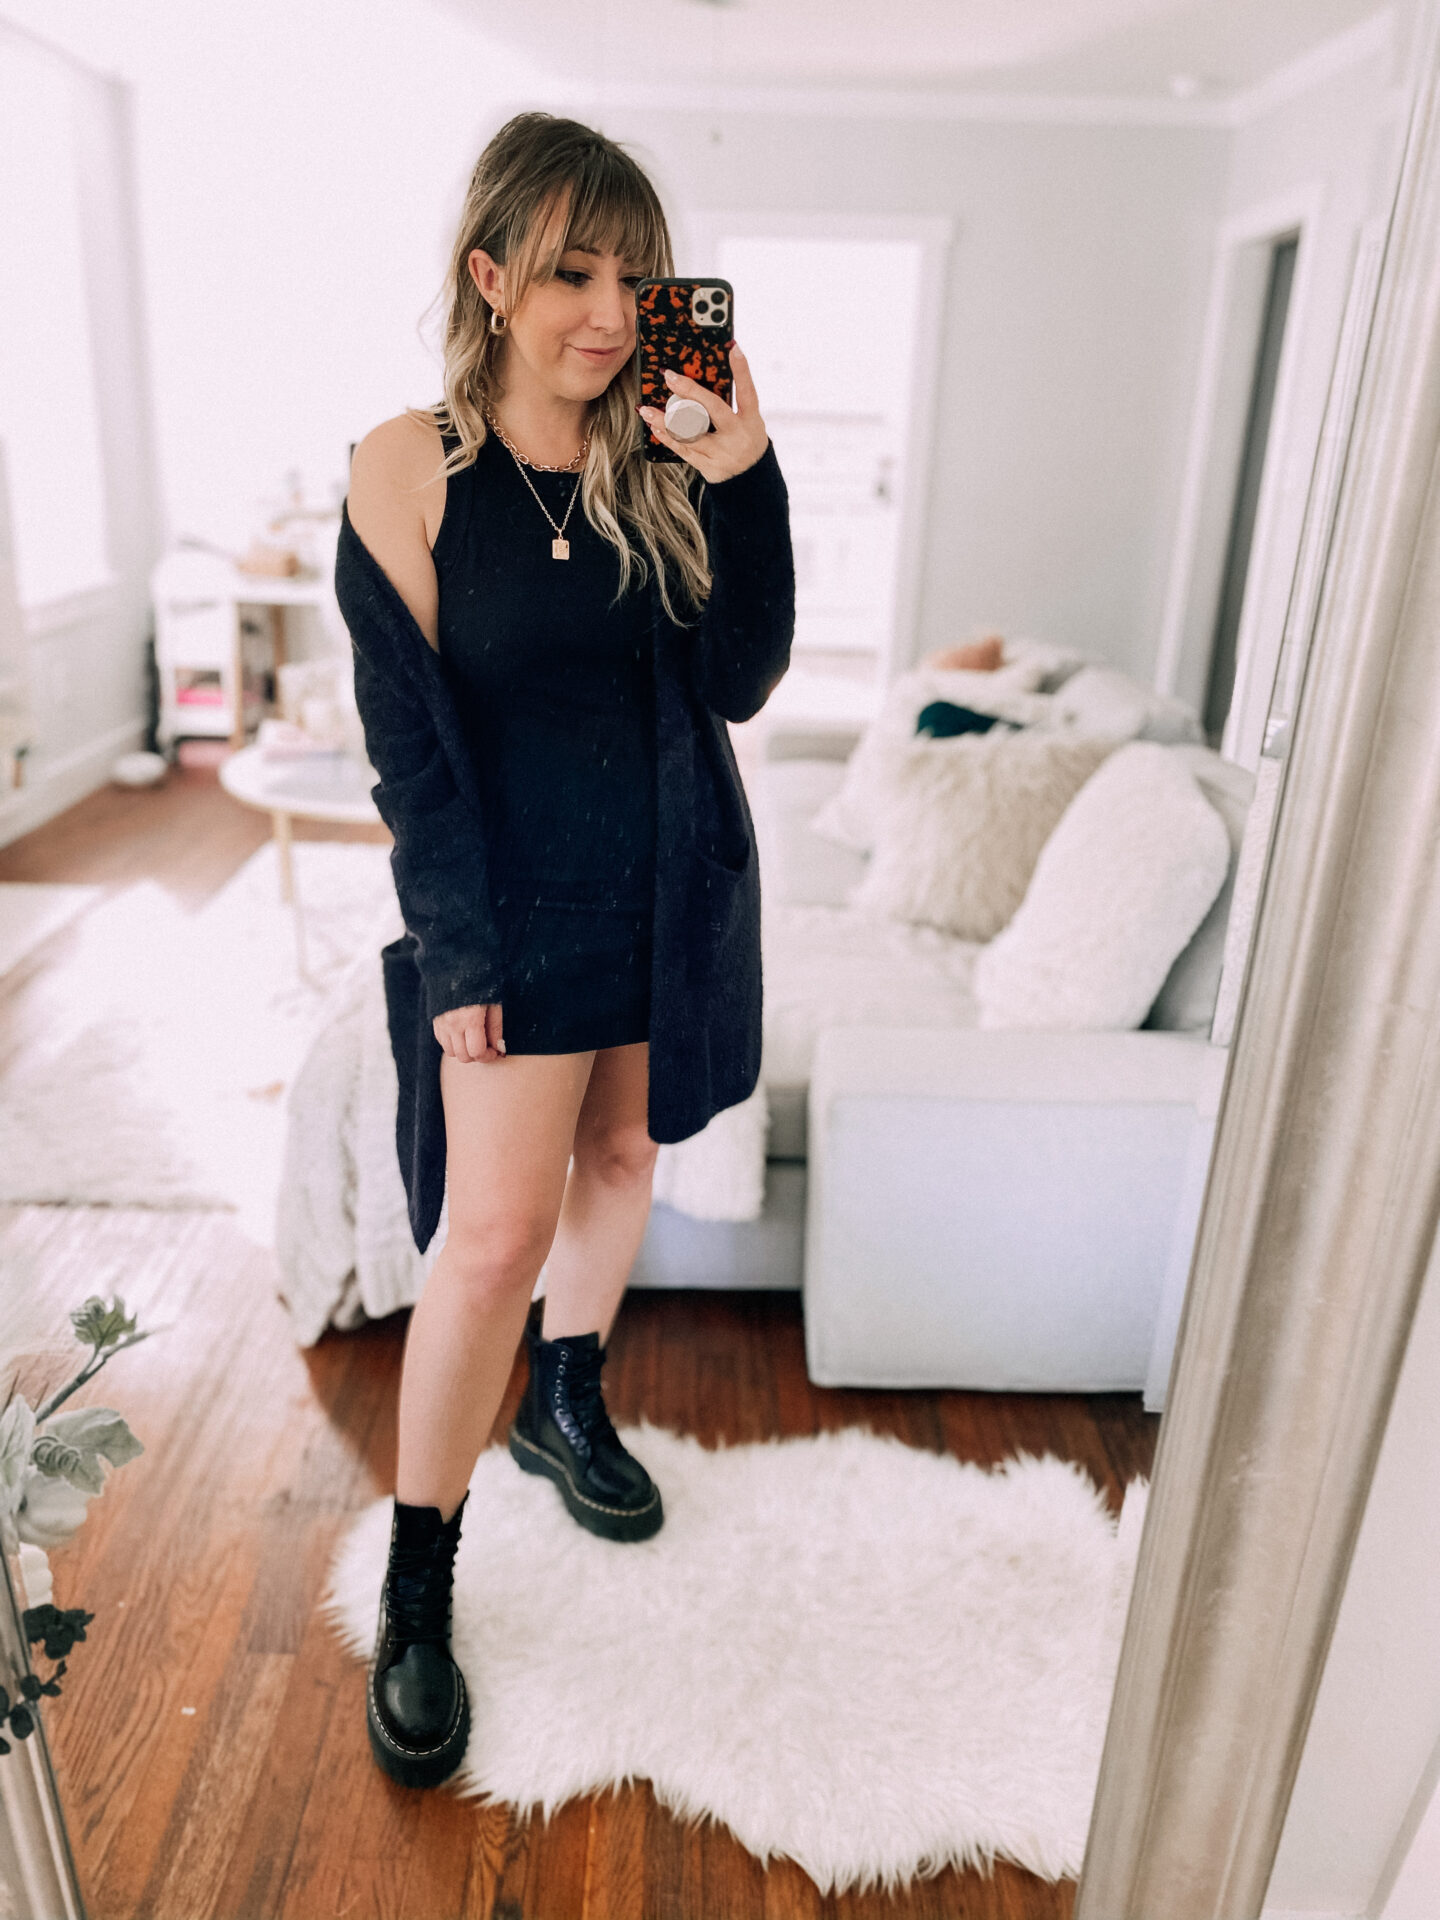 Black ribbed tank dress and fuzzy cardigan outfit